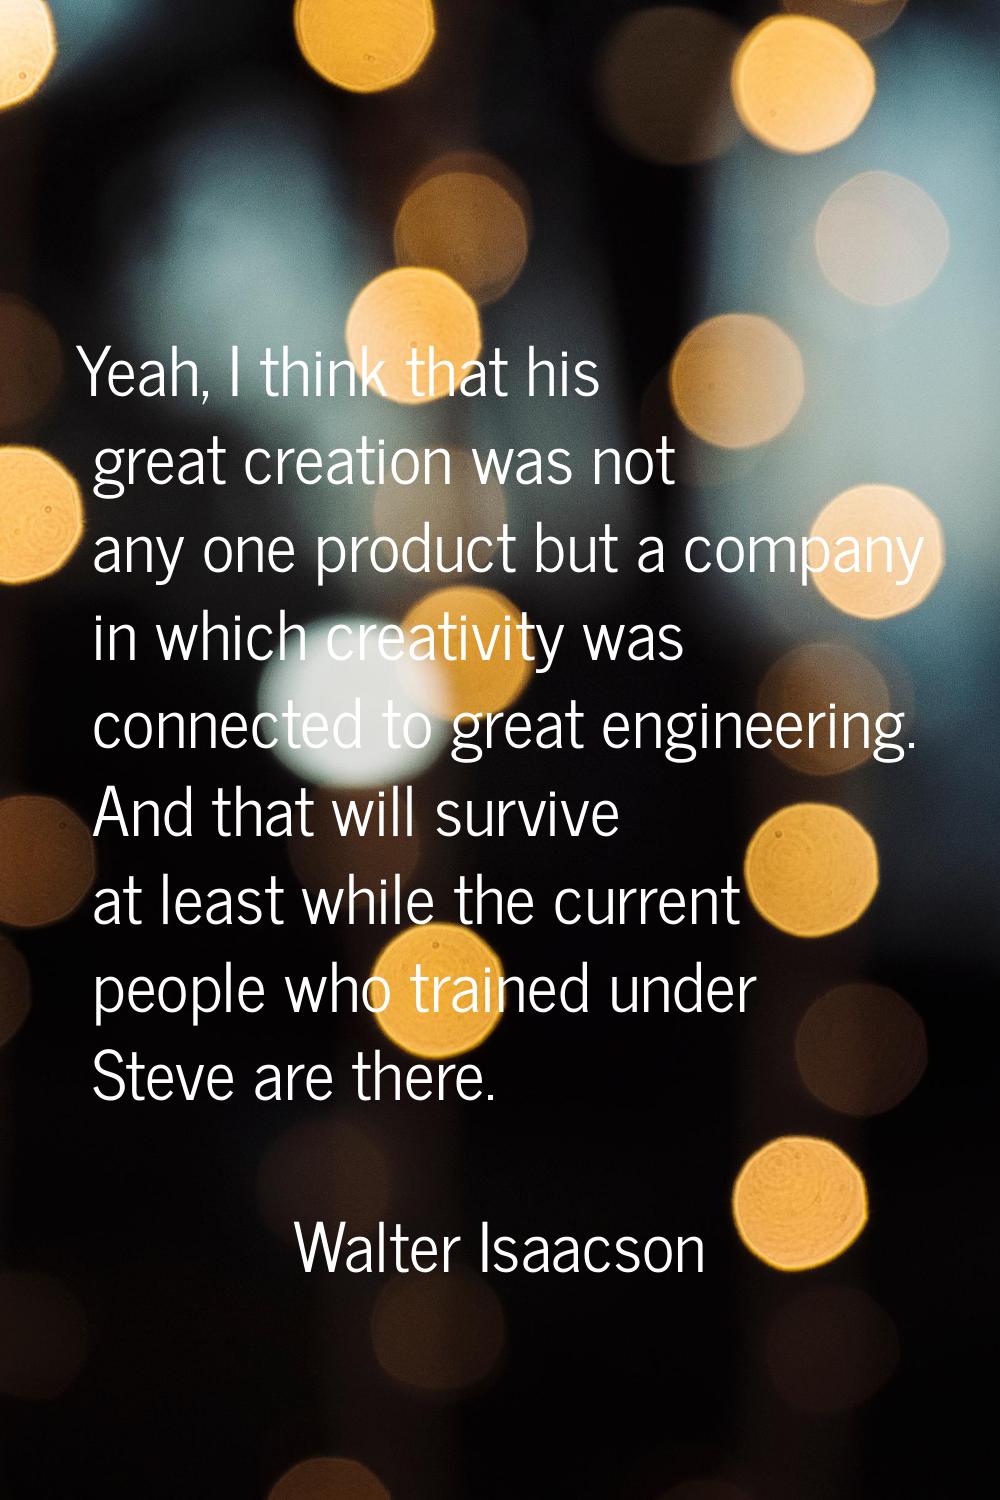 Yeah, I think that his great creation was not any one product but a company in which creativity was